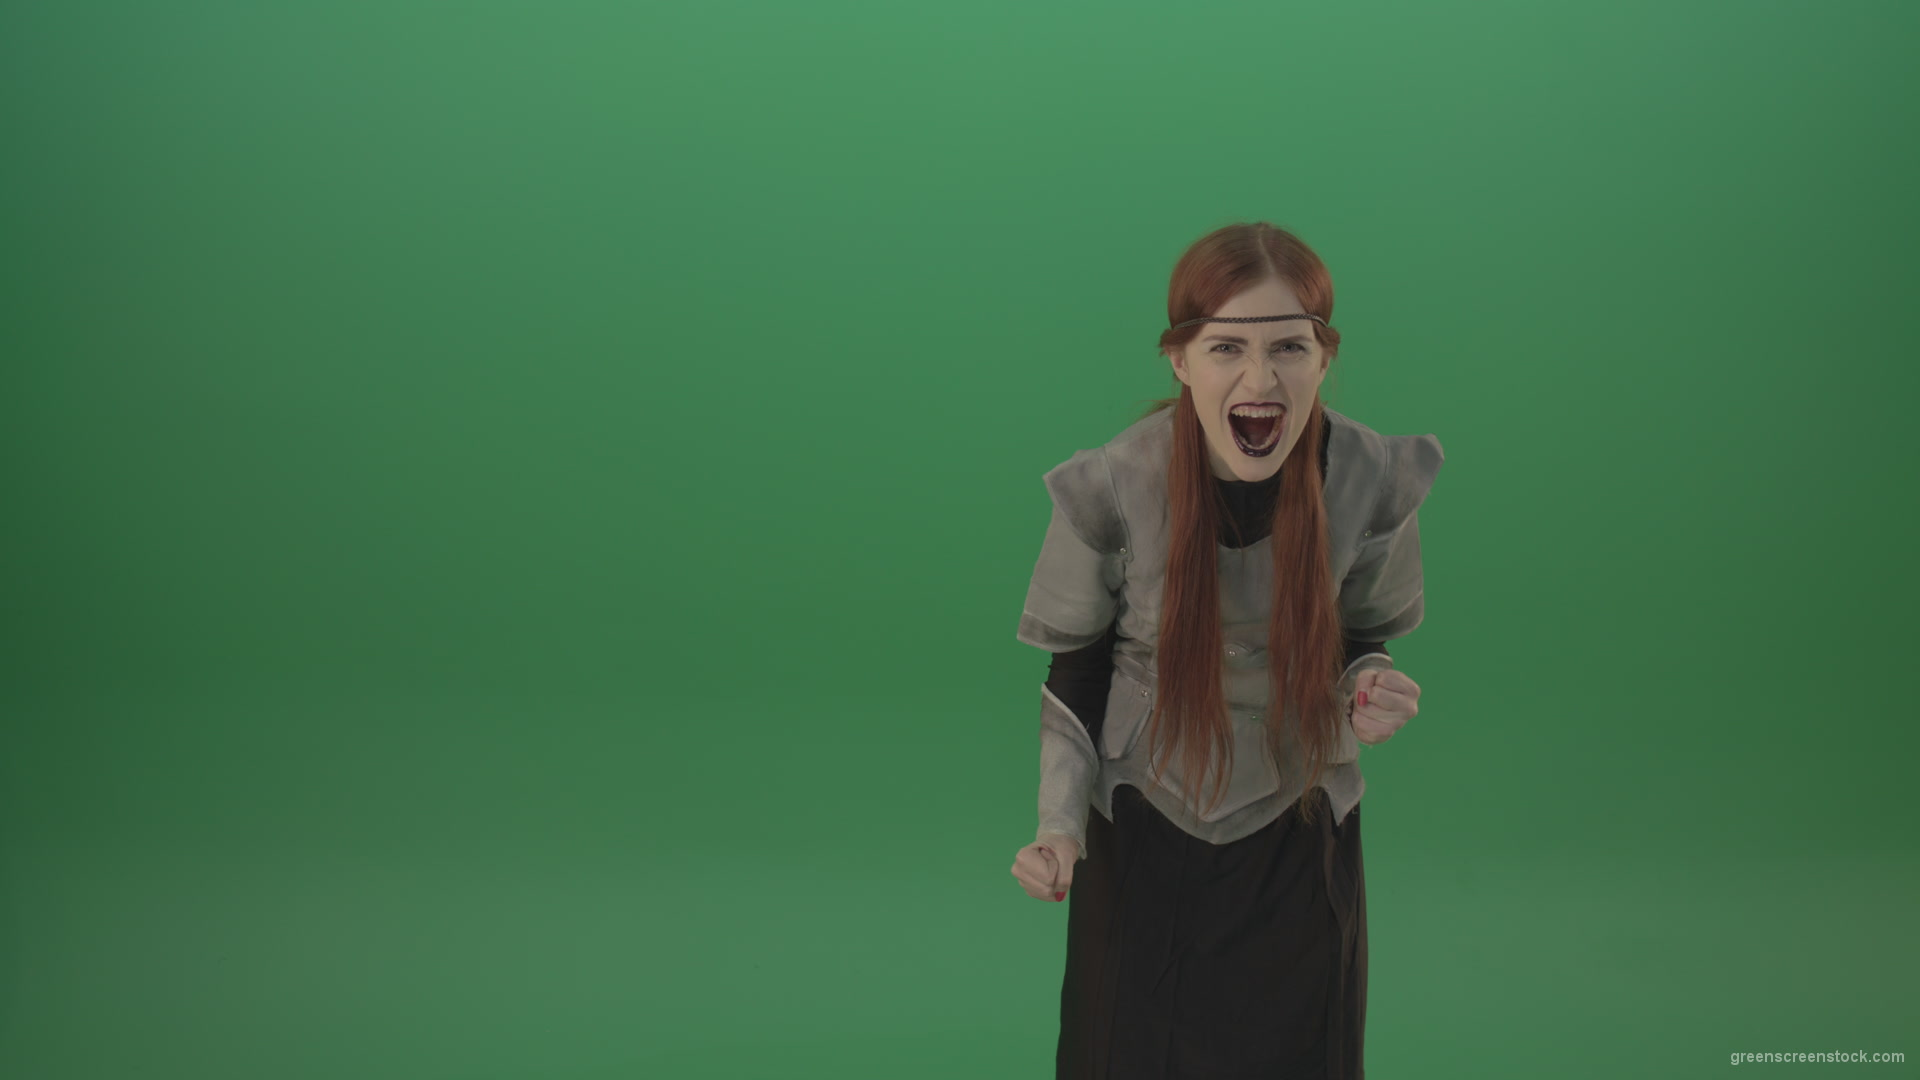 Witch-girl-watched-and-screamed-at-the-camera-with-green-eyes-on-a-green-background_004 Green Screen Stock